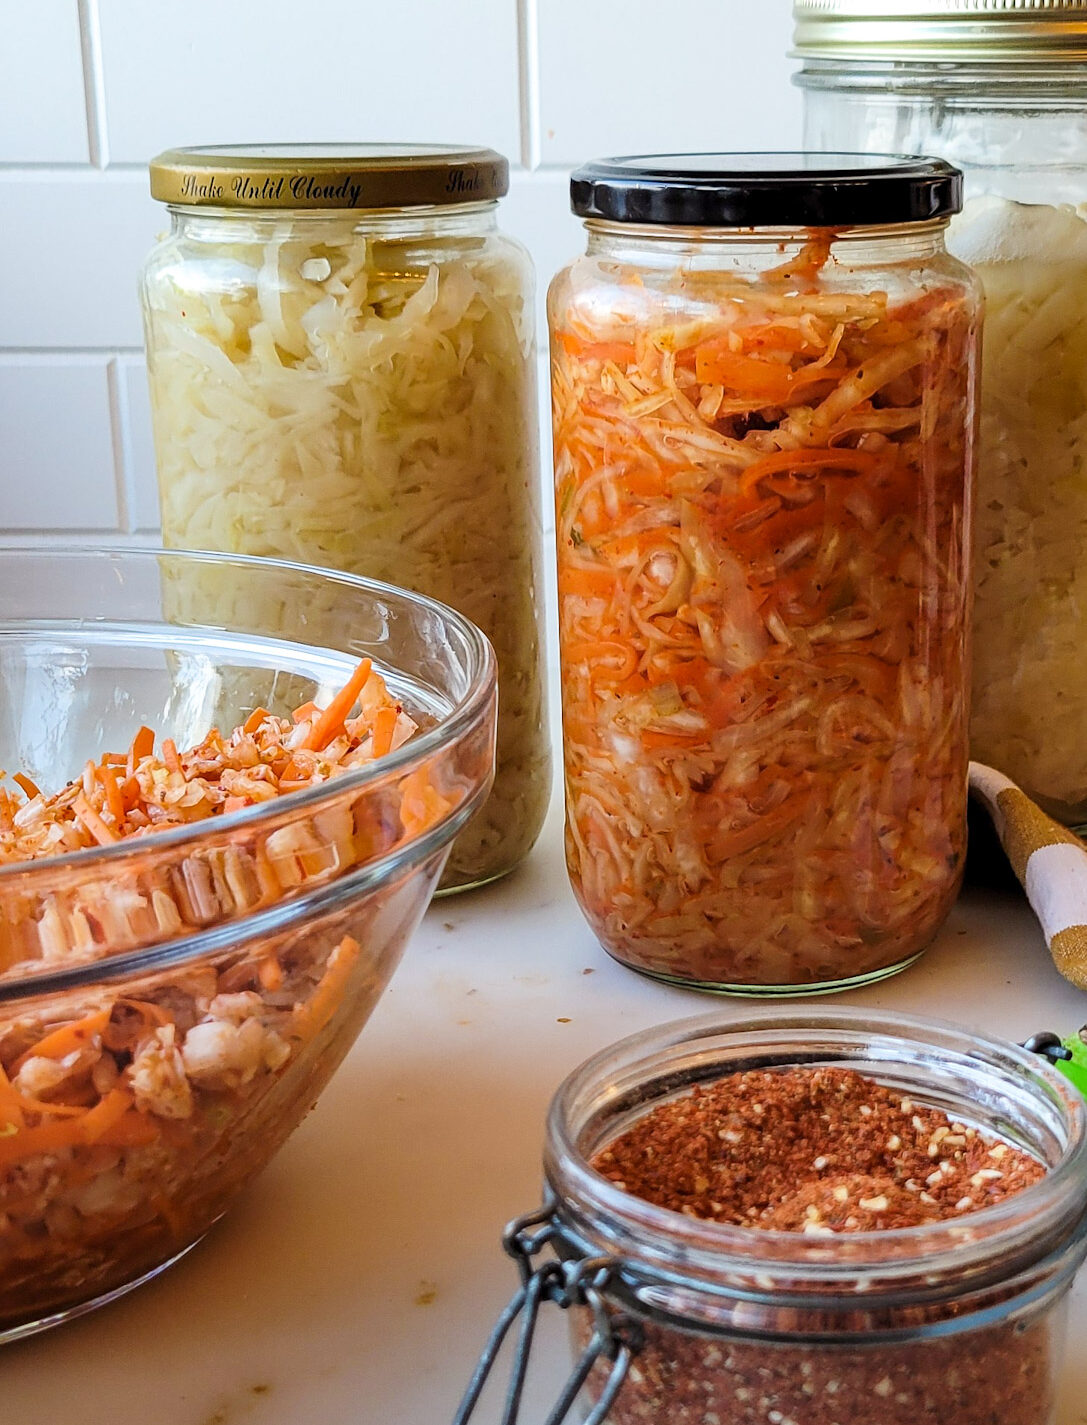 Jars of Sauerkraut and Kimchi on the counter, along with the kimchi spice blend in a jar beside them.